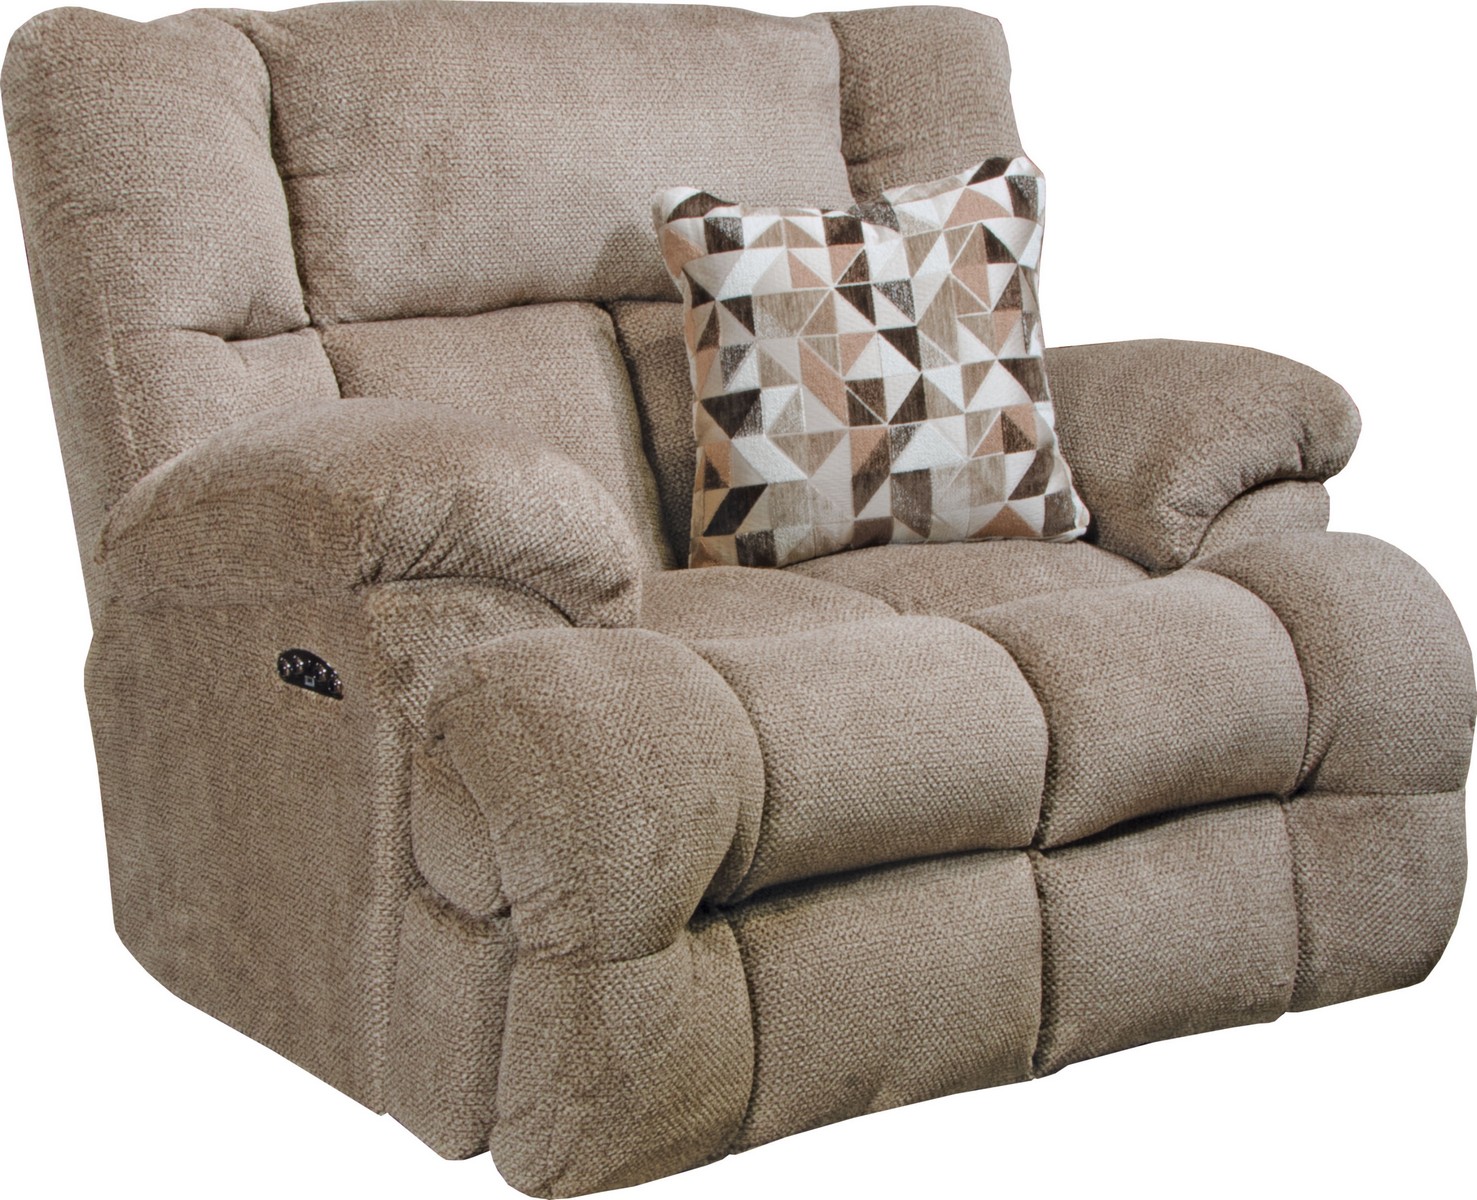 CatNapper Brice Power Lay Flat Recliner with Power Headrest - Chateau